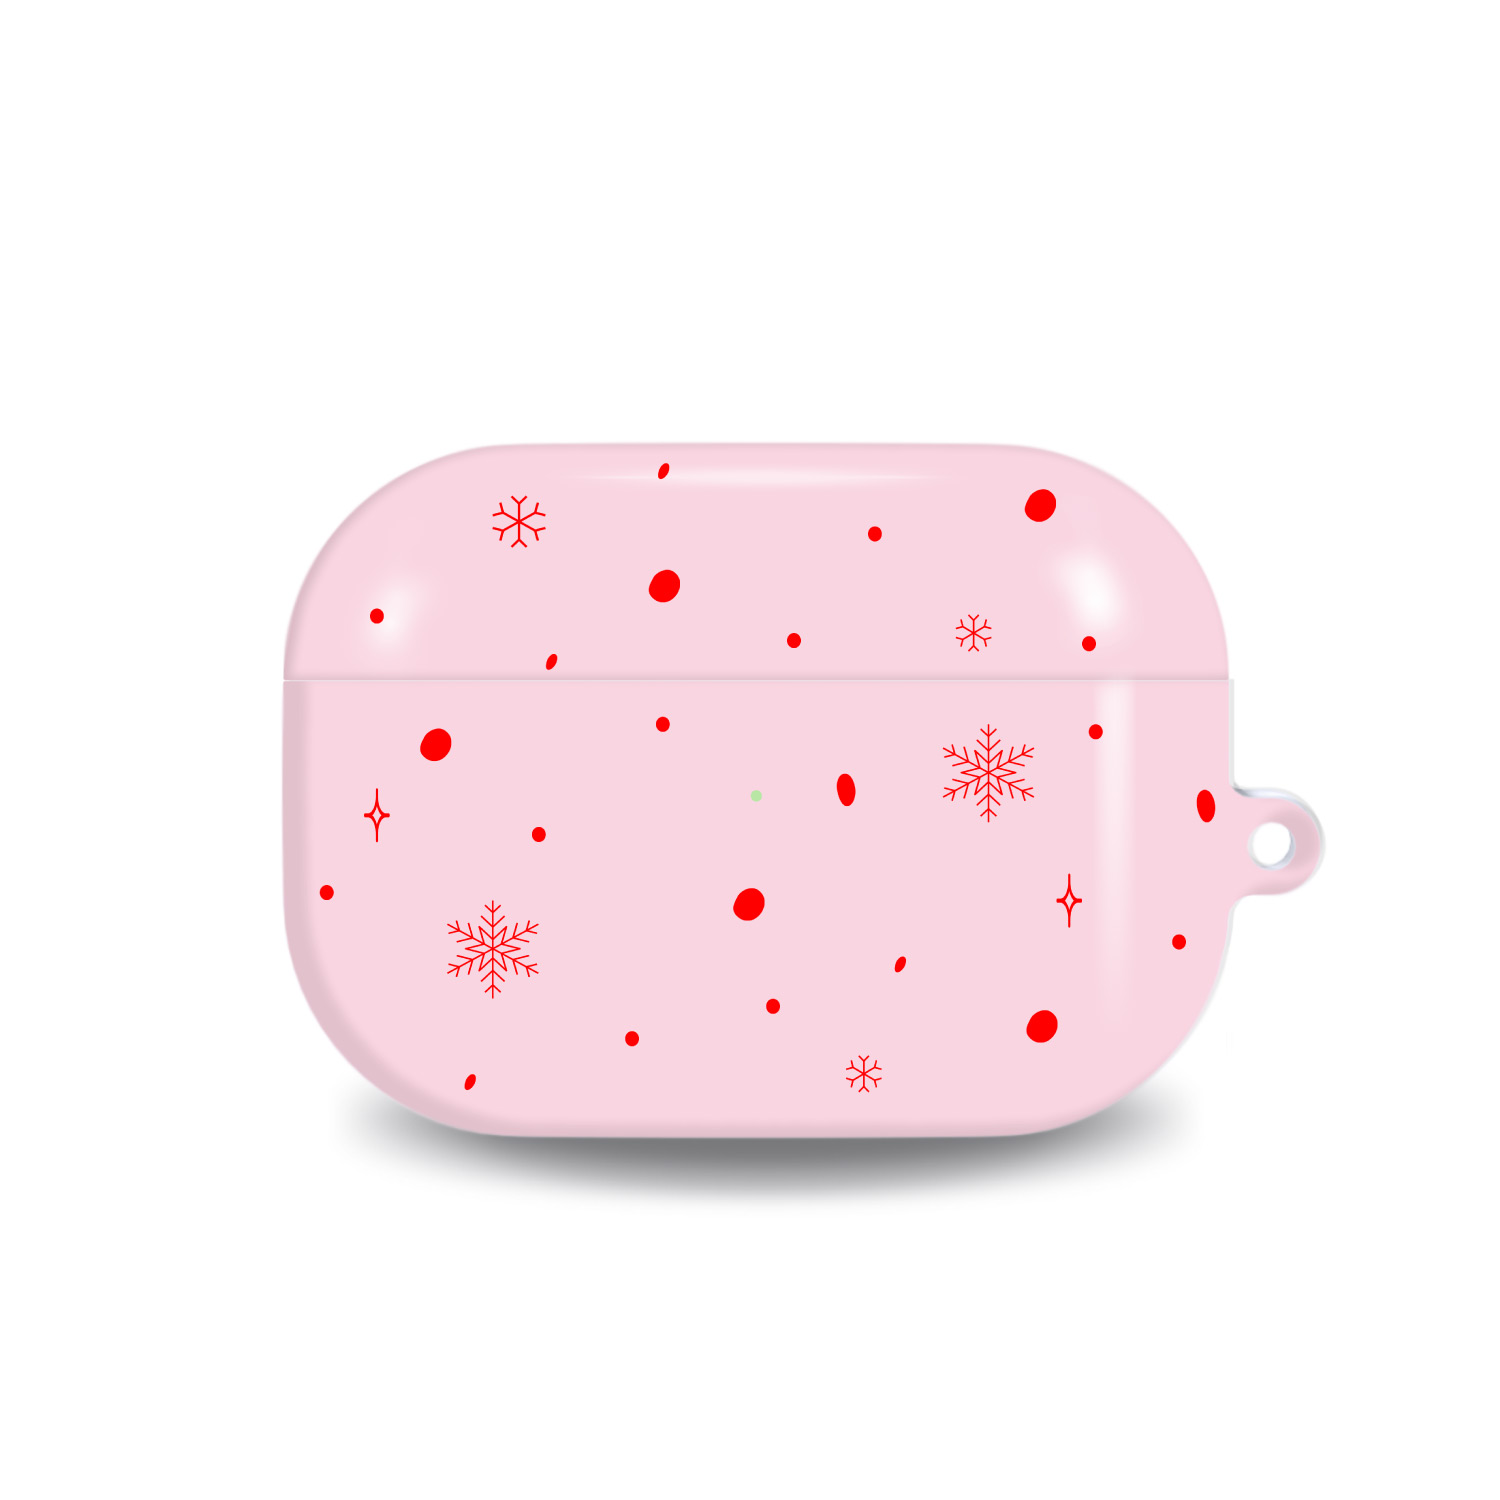 [airpods case] Let it snow _pink airpods case